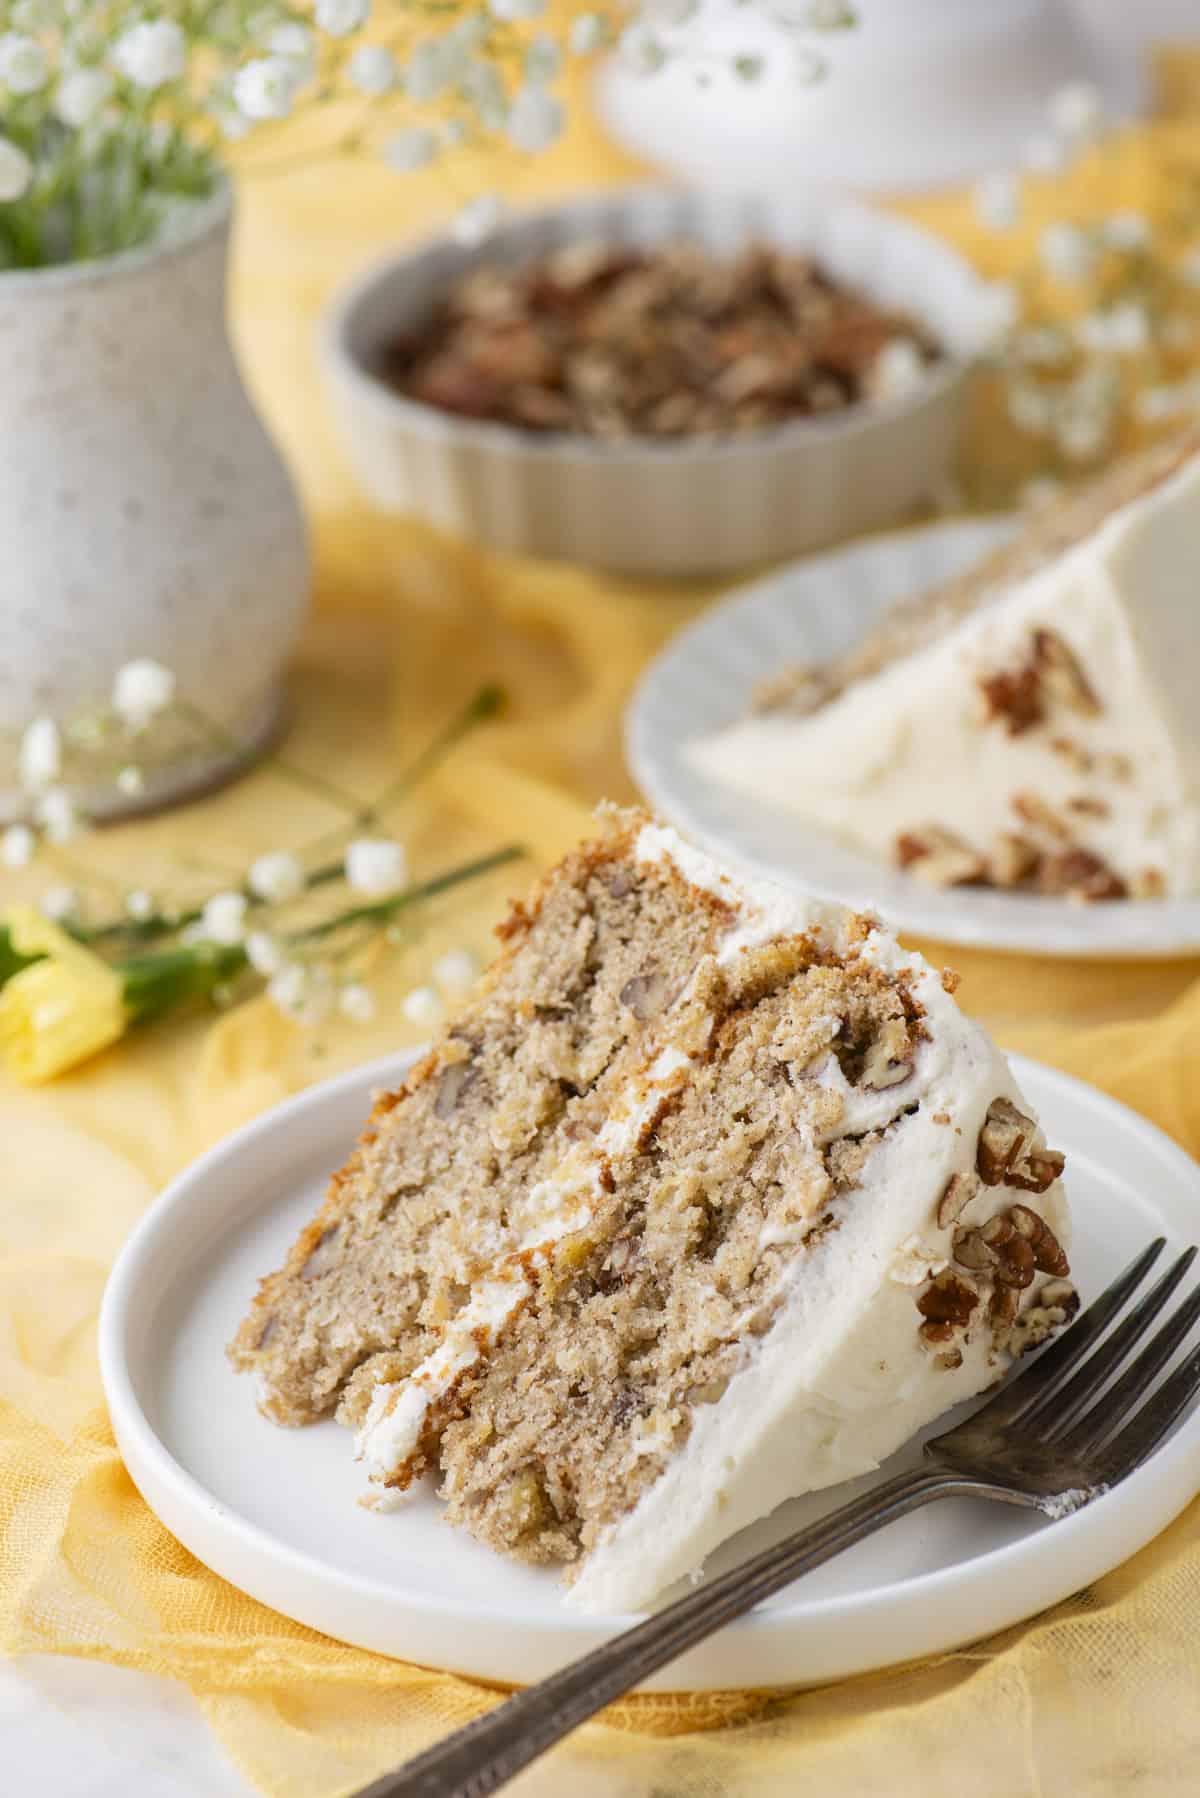 a slice of two-layer hummingbird cake on a white plate with a fork laying beside it, on top of a yellow cloth, with yellow and white flowers and another slice on a plate and a dish of pecans in the background